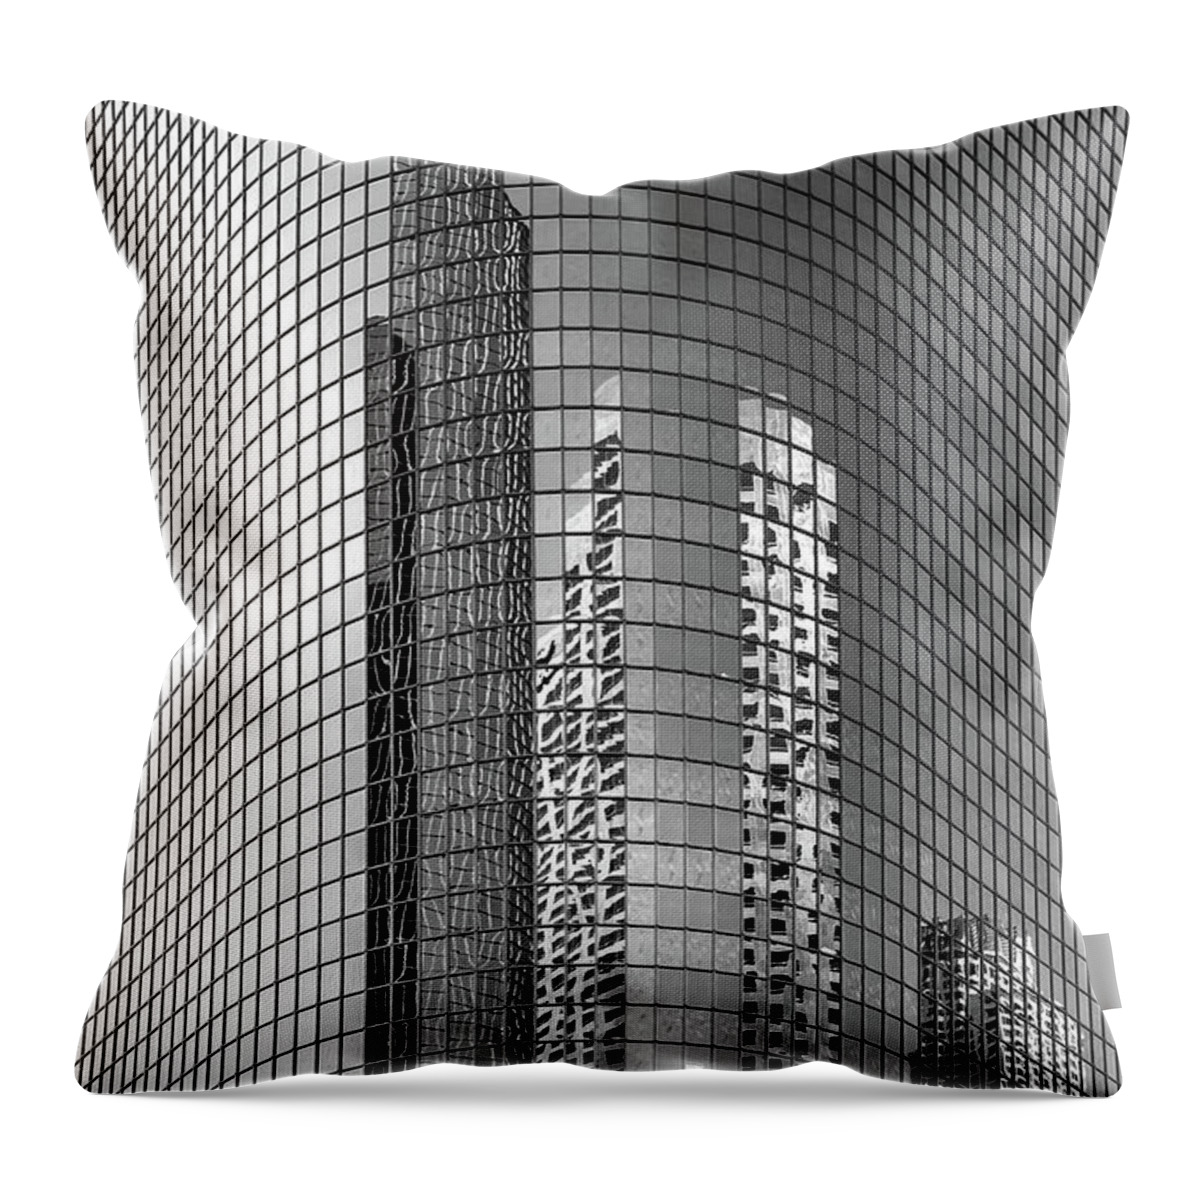 Los Angeles Throw Pillow featuring the photograph Food Chain by Az Jackson